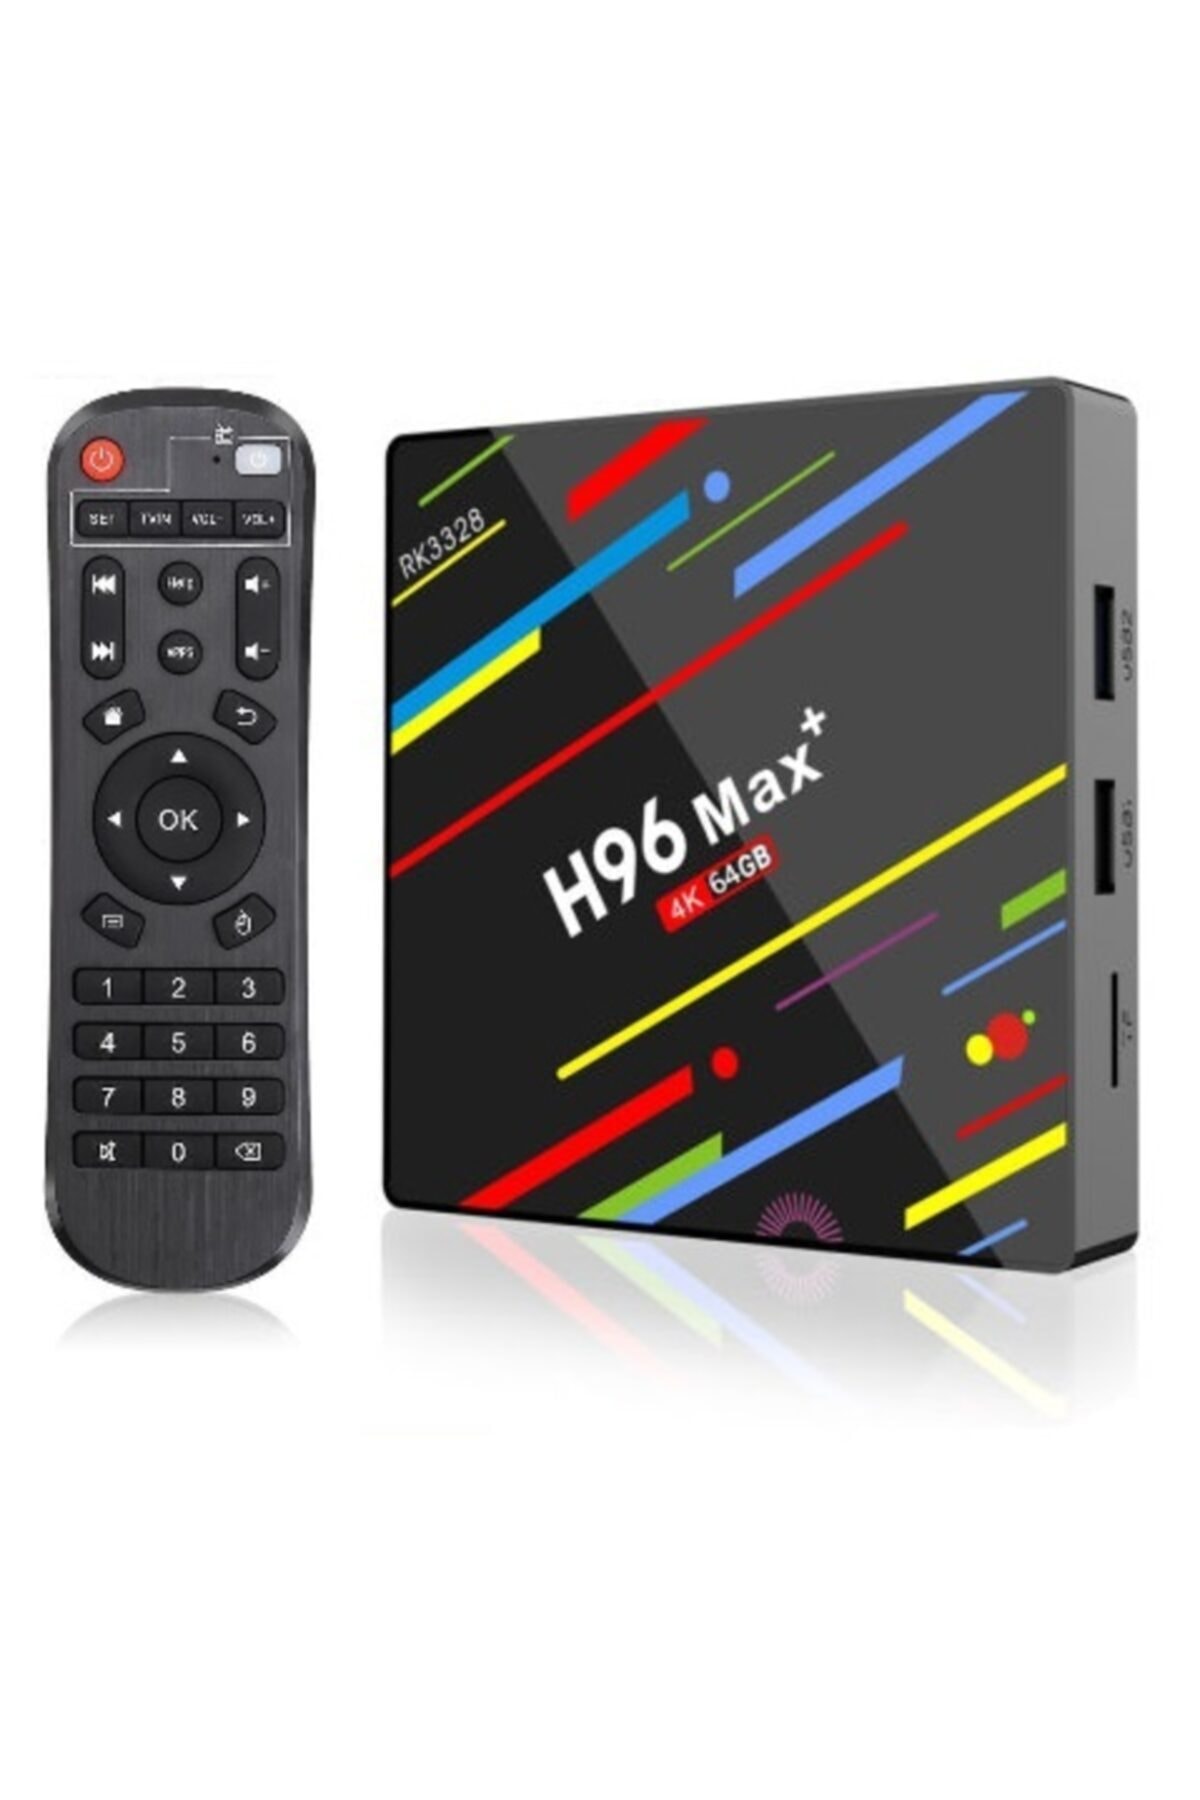 4k Ultra Hd Android Tv Box H96 Max Ram:4gb Rom:64gb Android 8.1 Rk3328 H96max